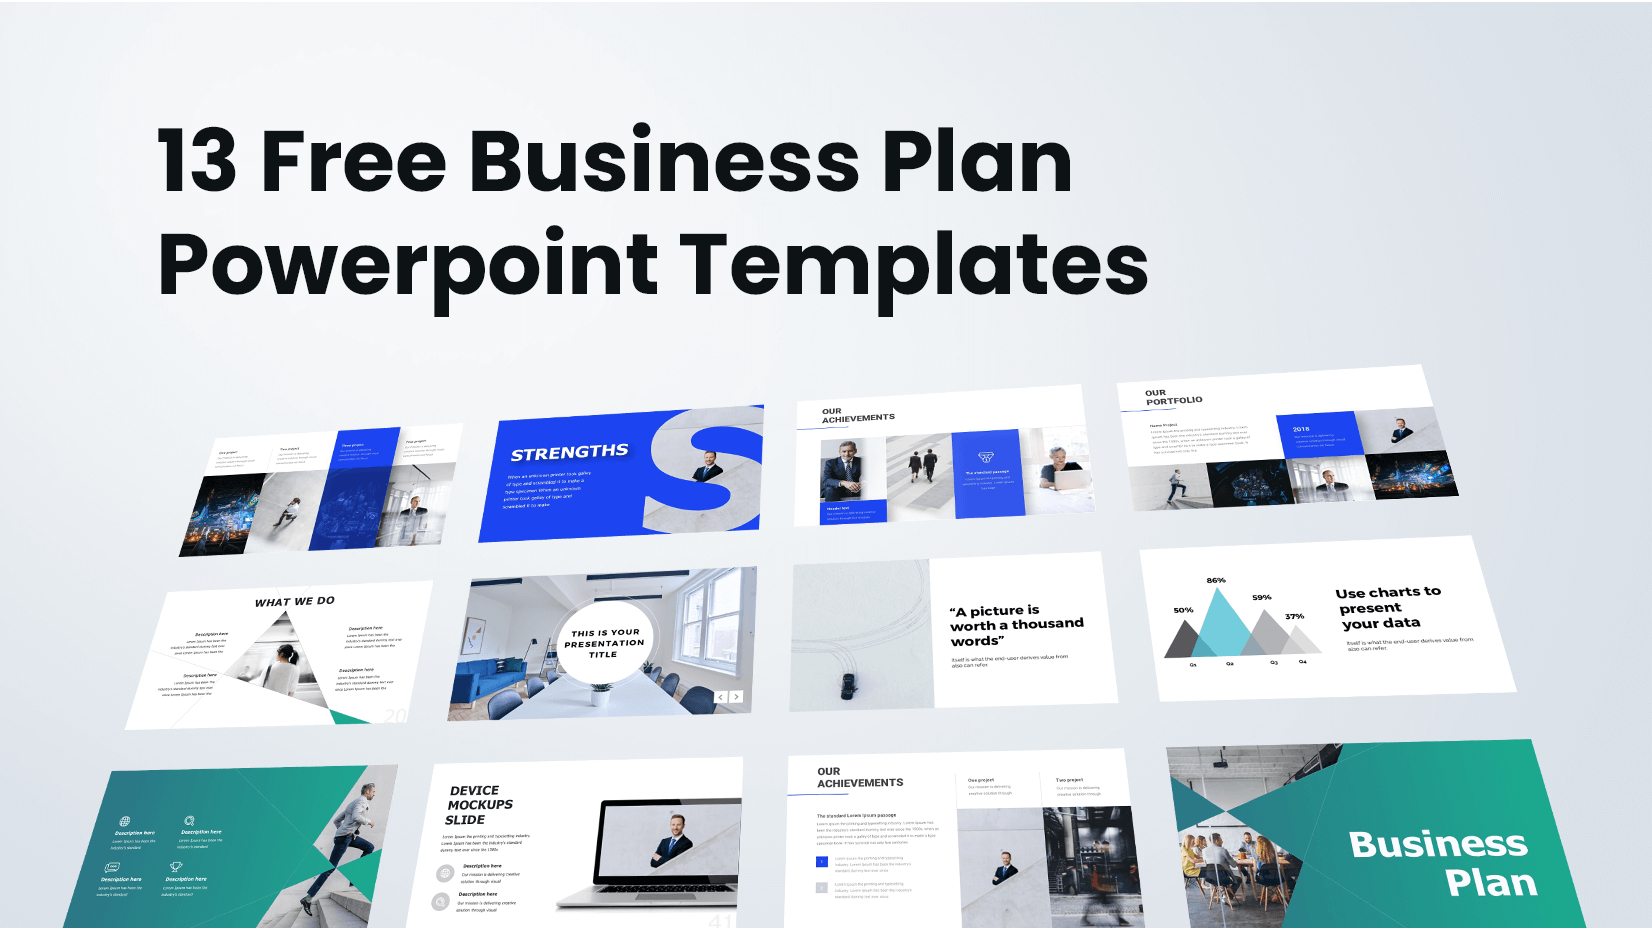 13 Free Business Plan Powerpoint Templates To Get Now In How To Design A Powerpoint Template